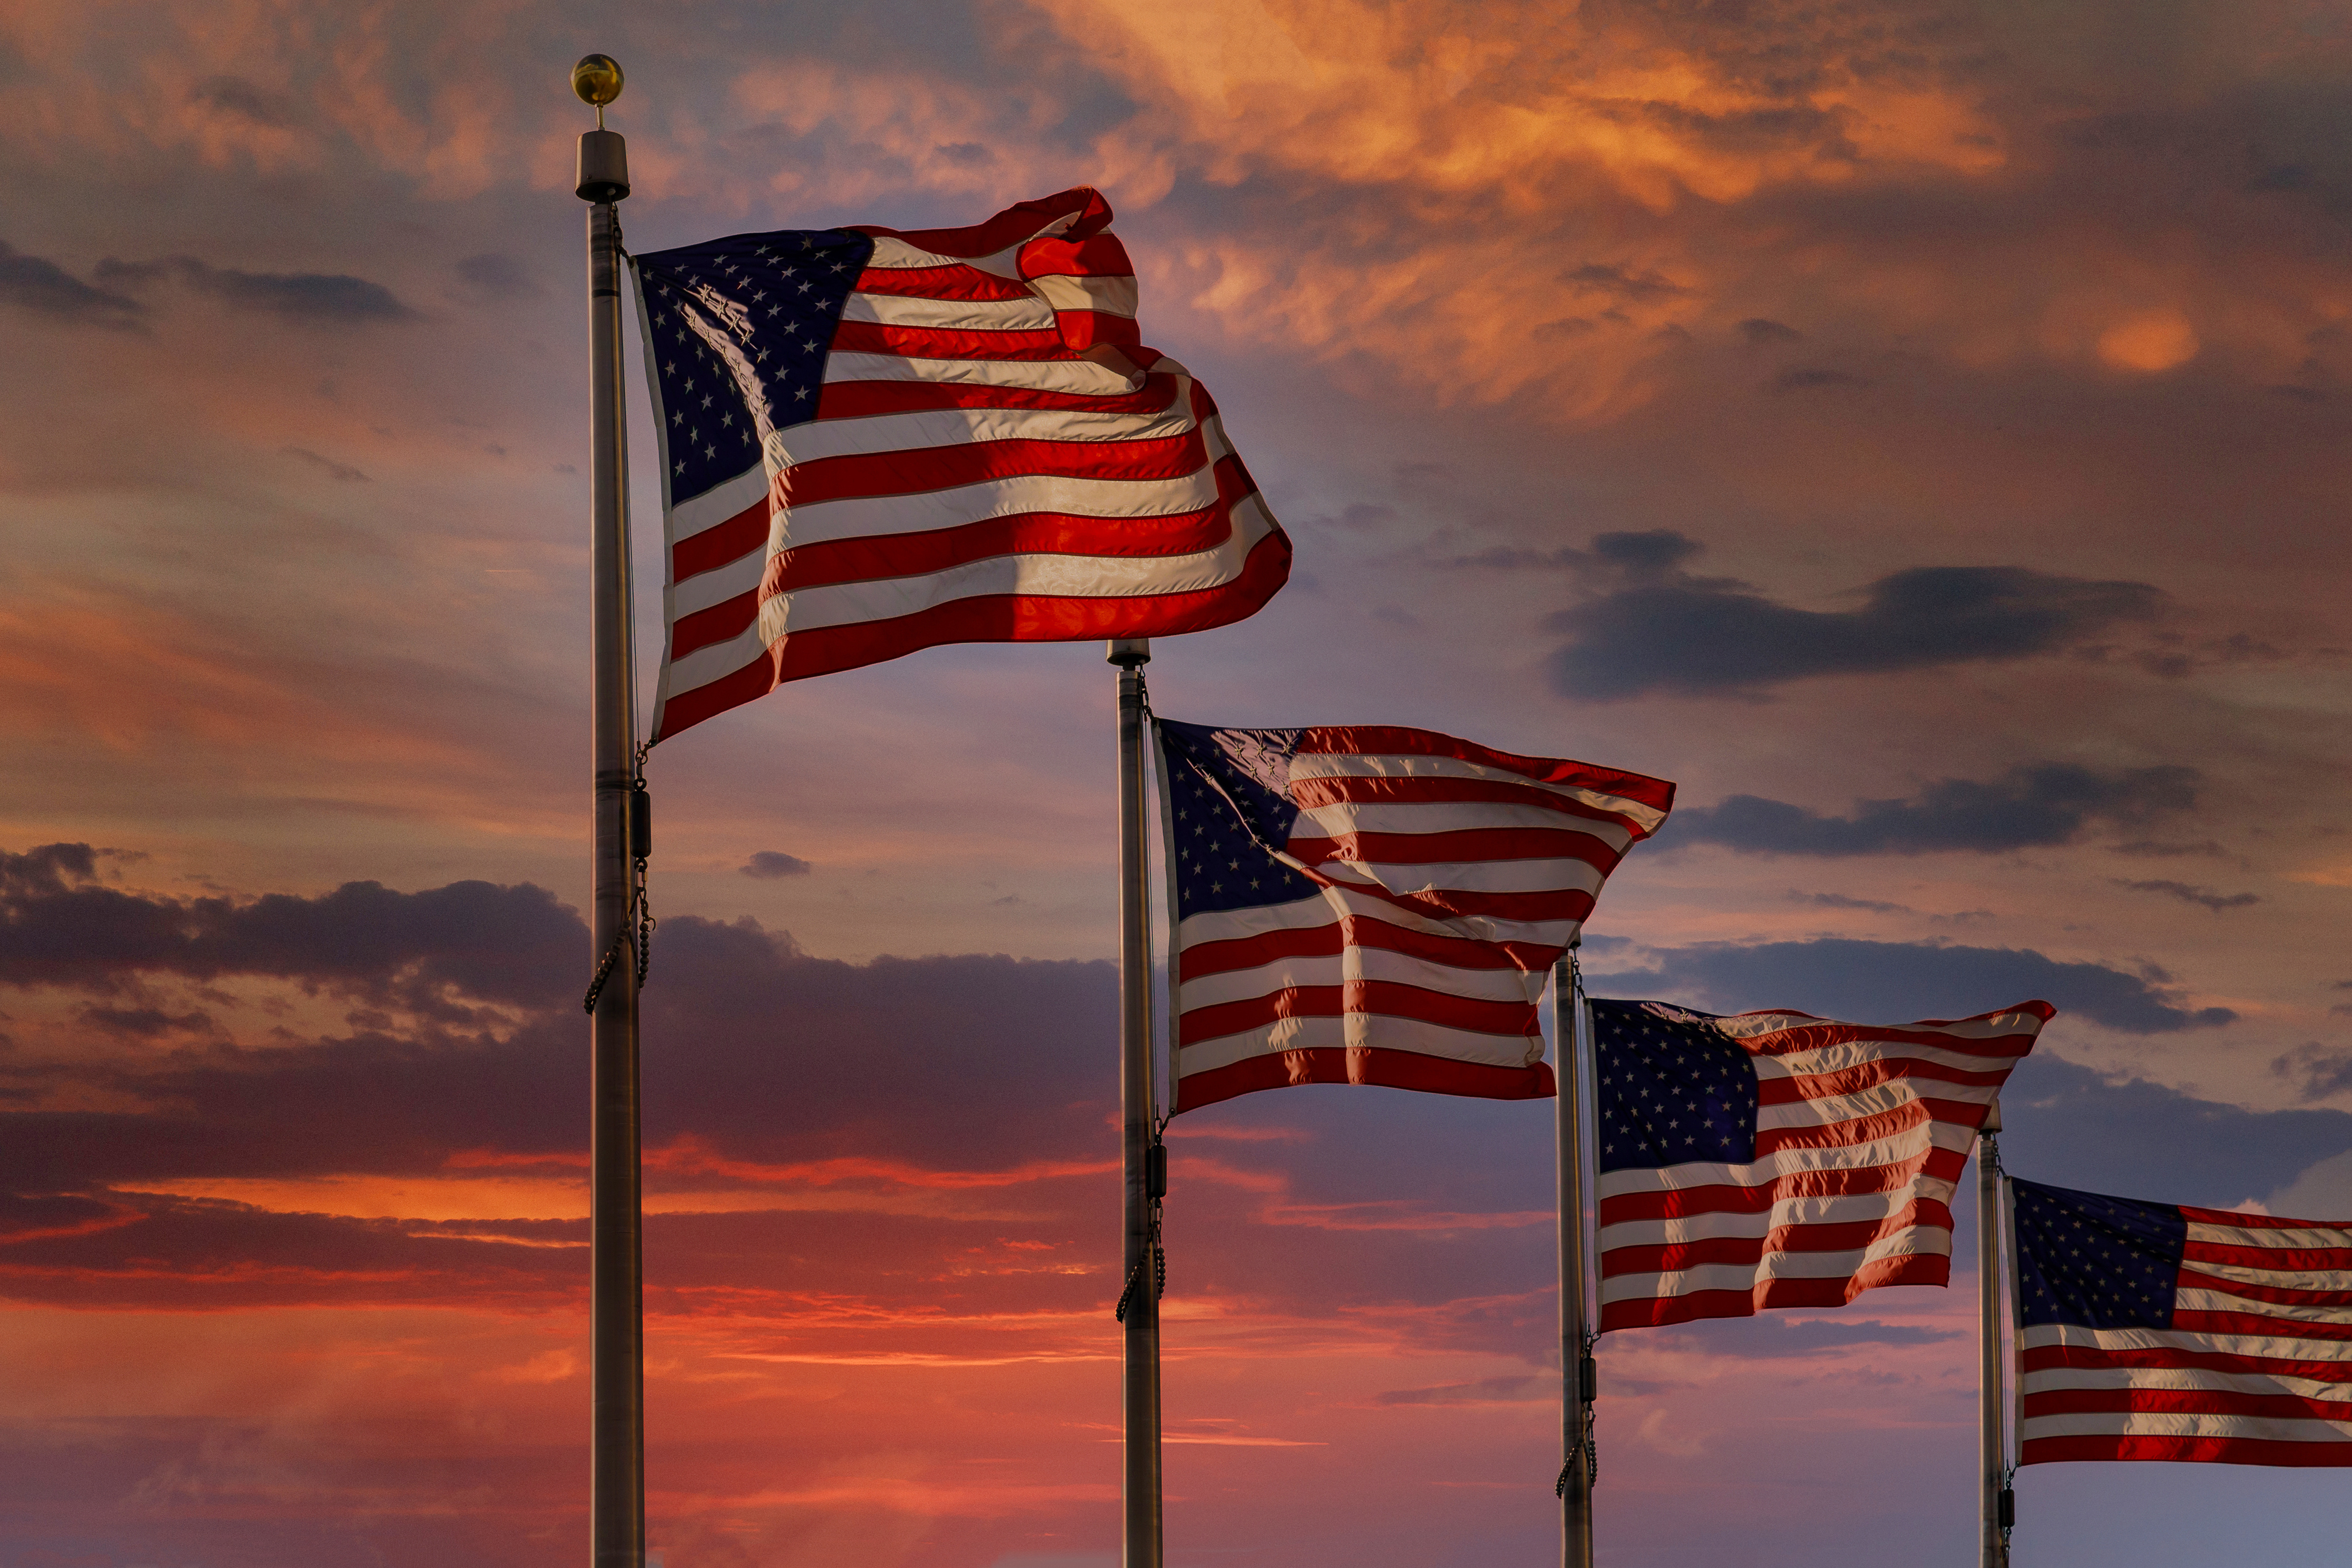 American flag backlit by waving large during scenic sunset